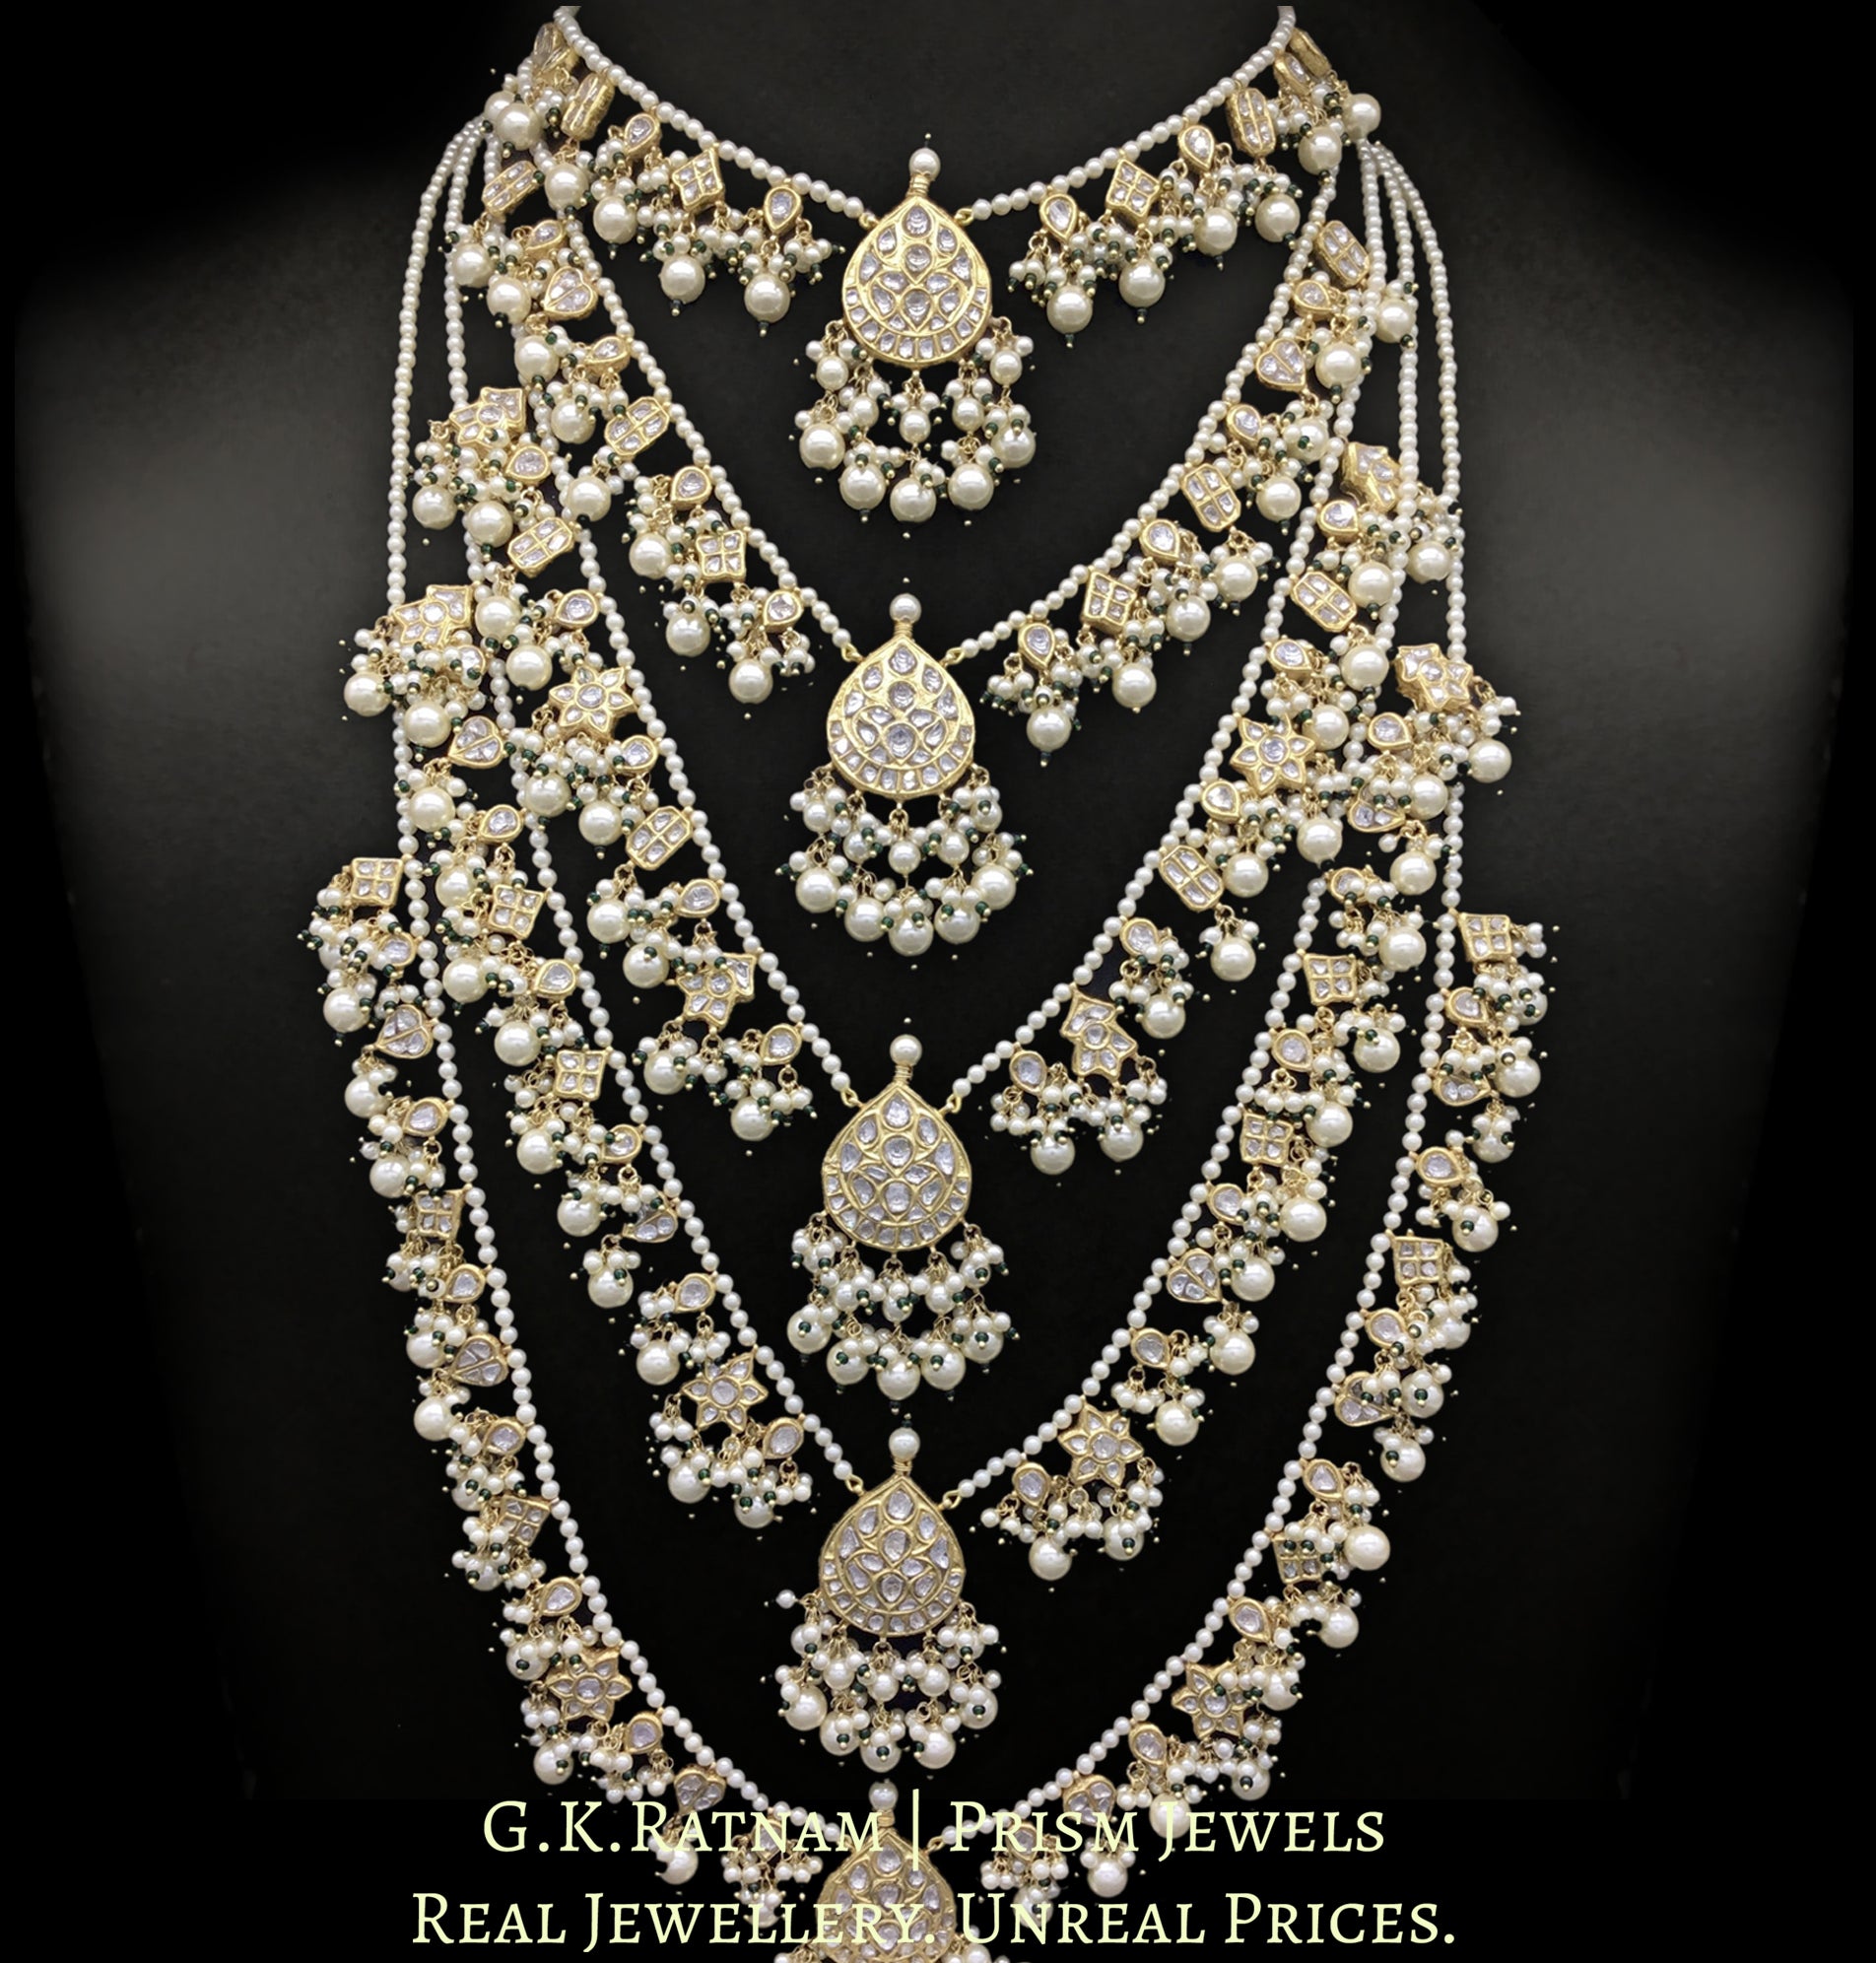 23k Gold and Diamond Polki panch-lad (five-row) Necklace with Lustrous Pearls and a touch of green